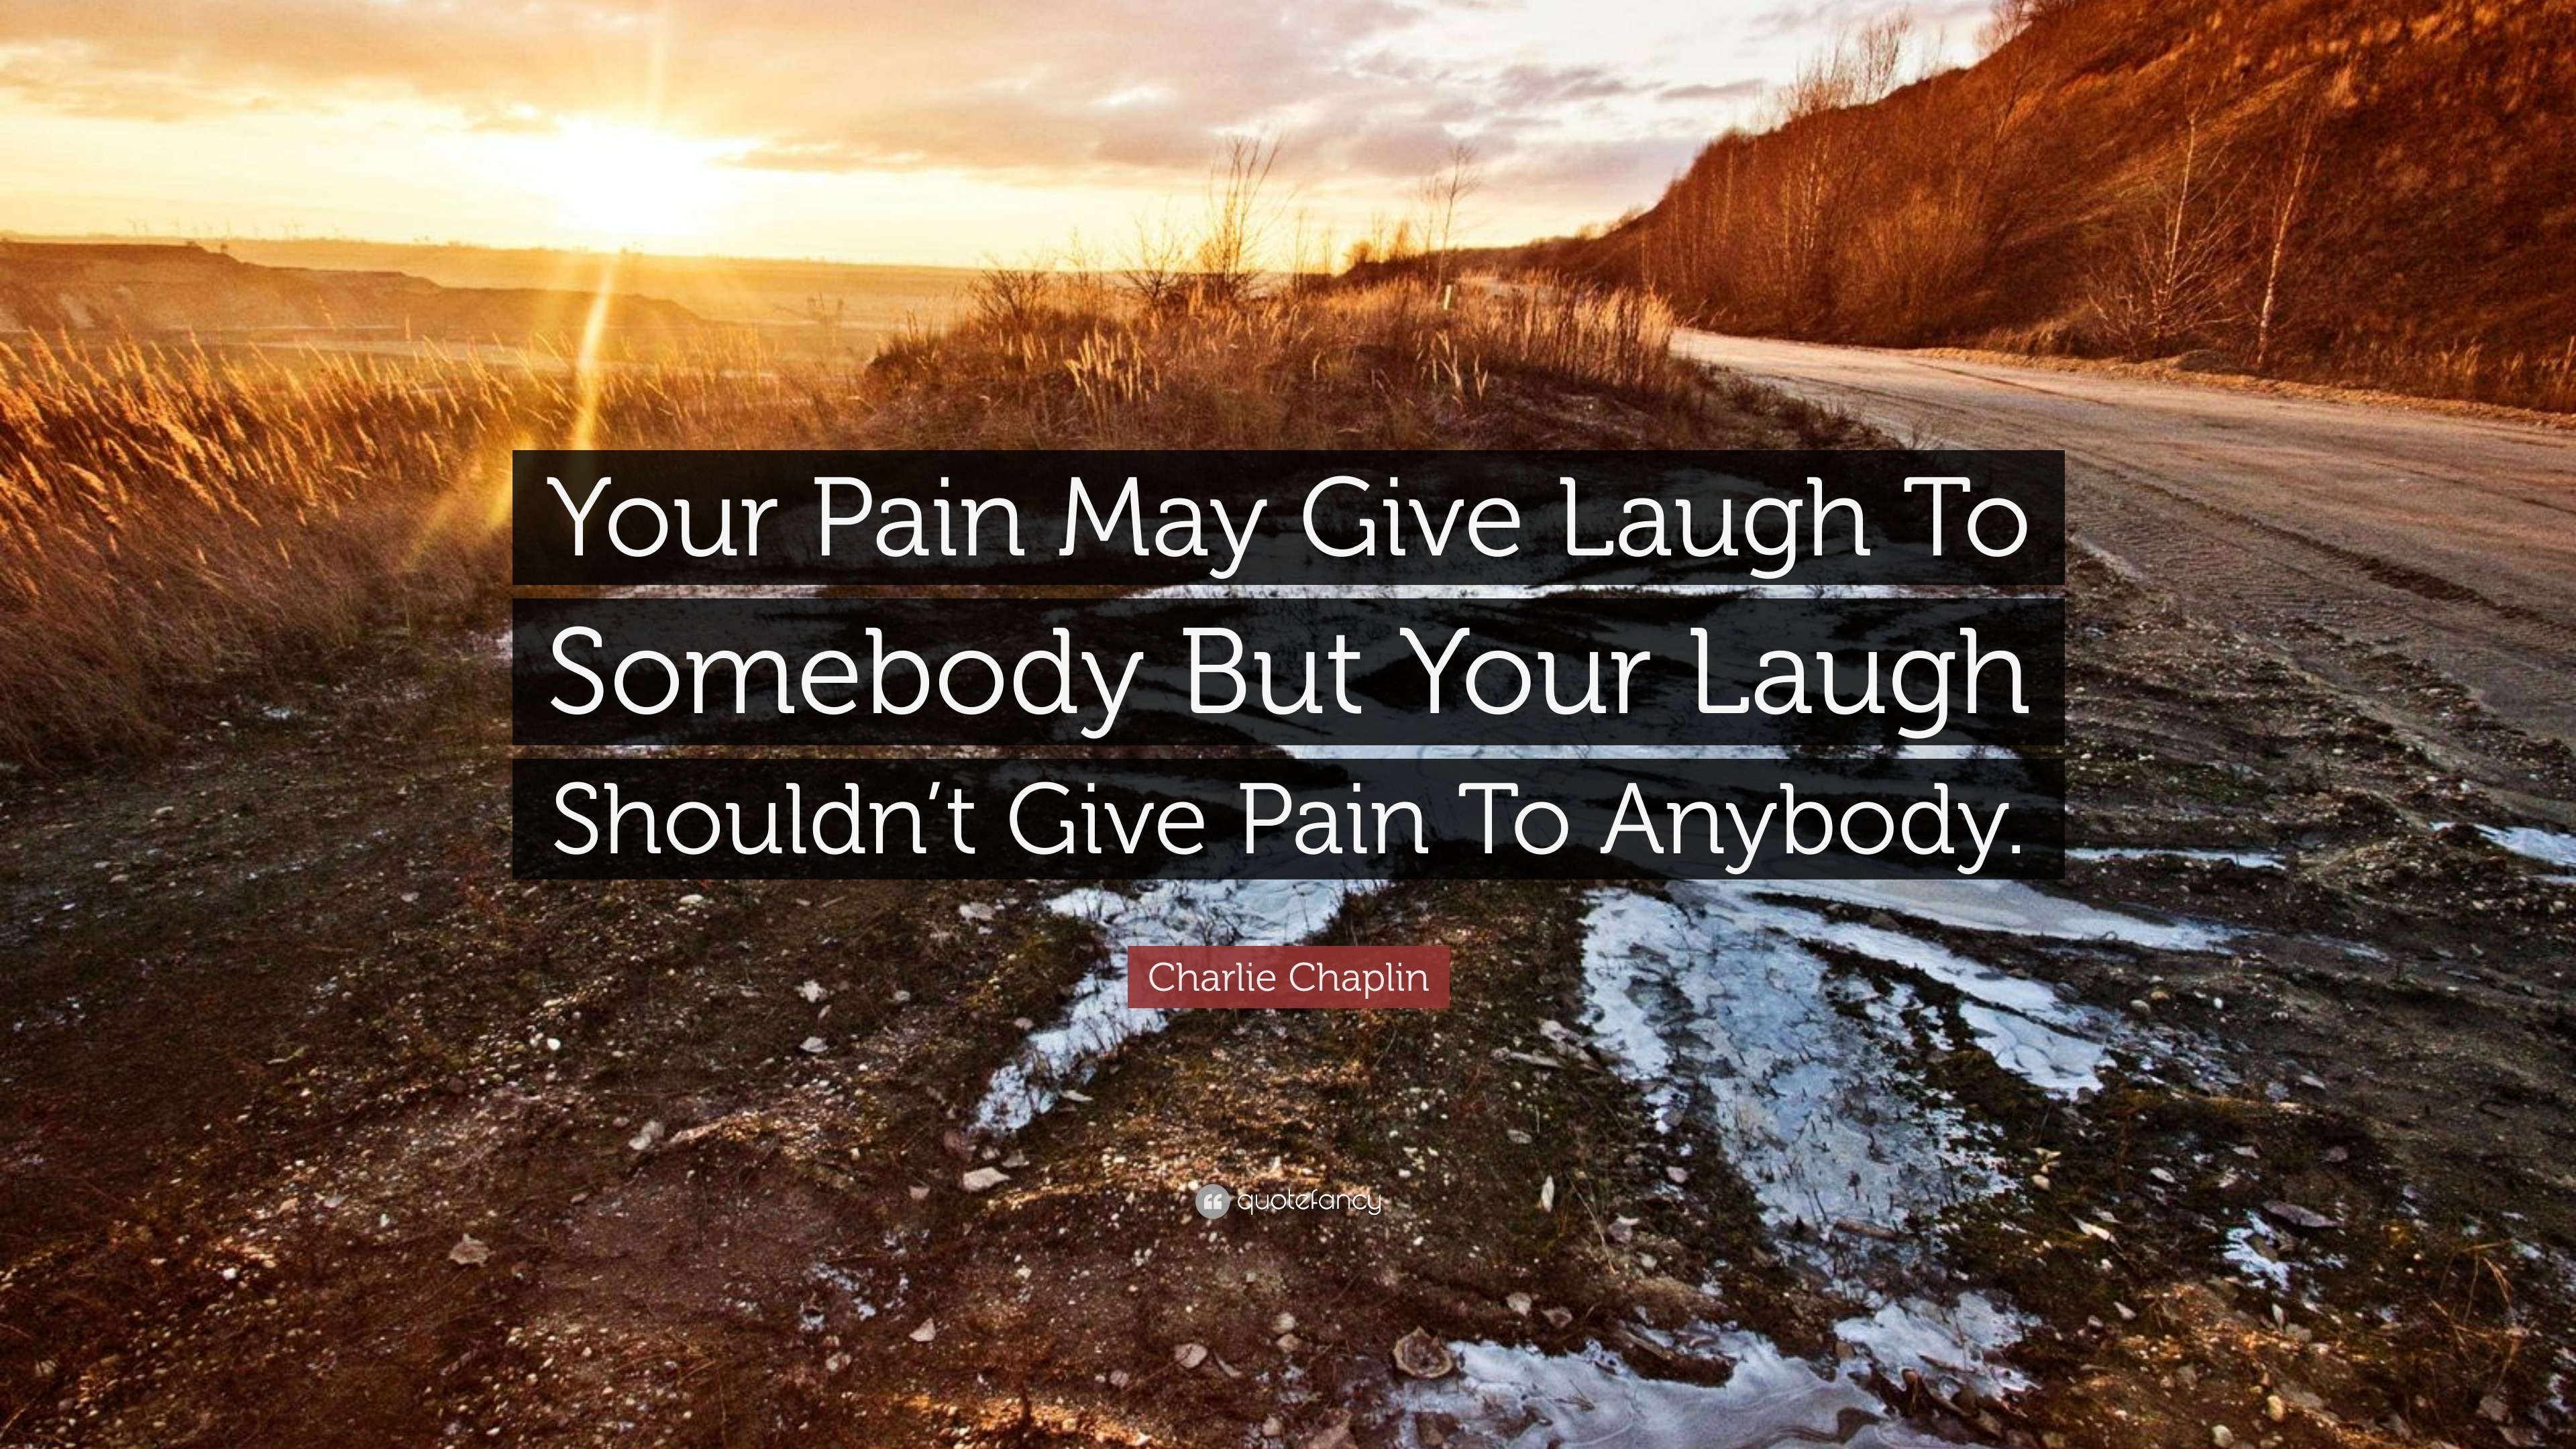 Charlie Chaplin Quote “Your Pain May Give Laugh To